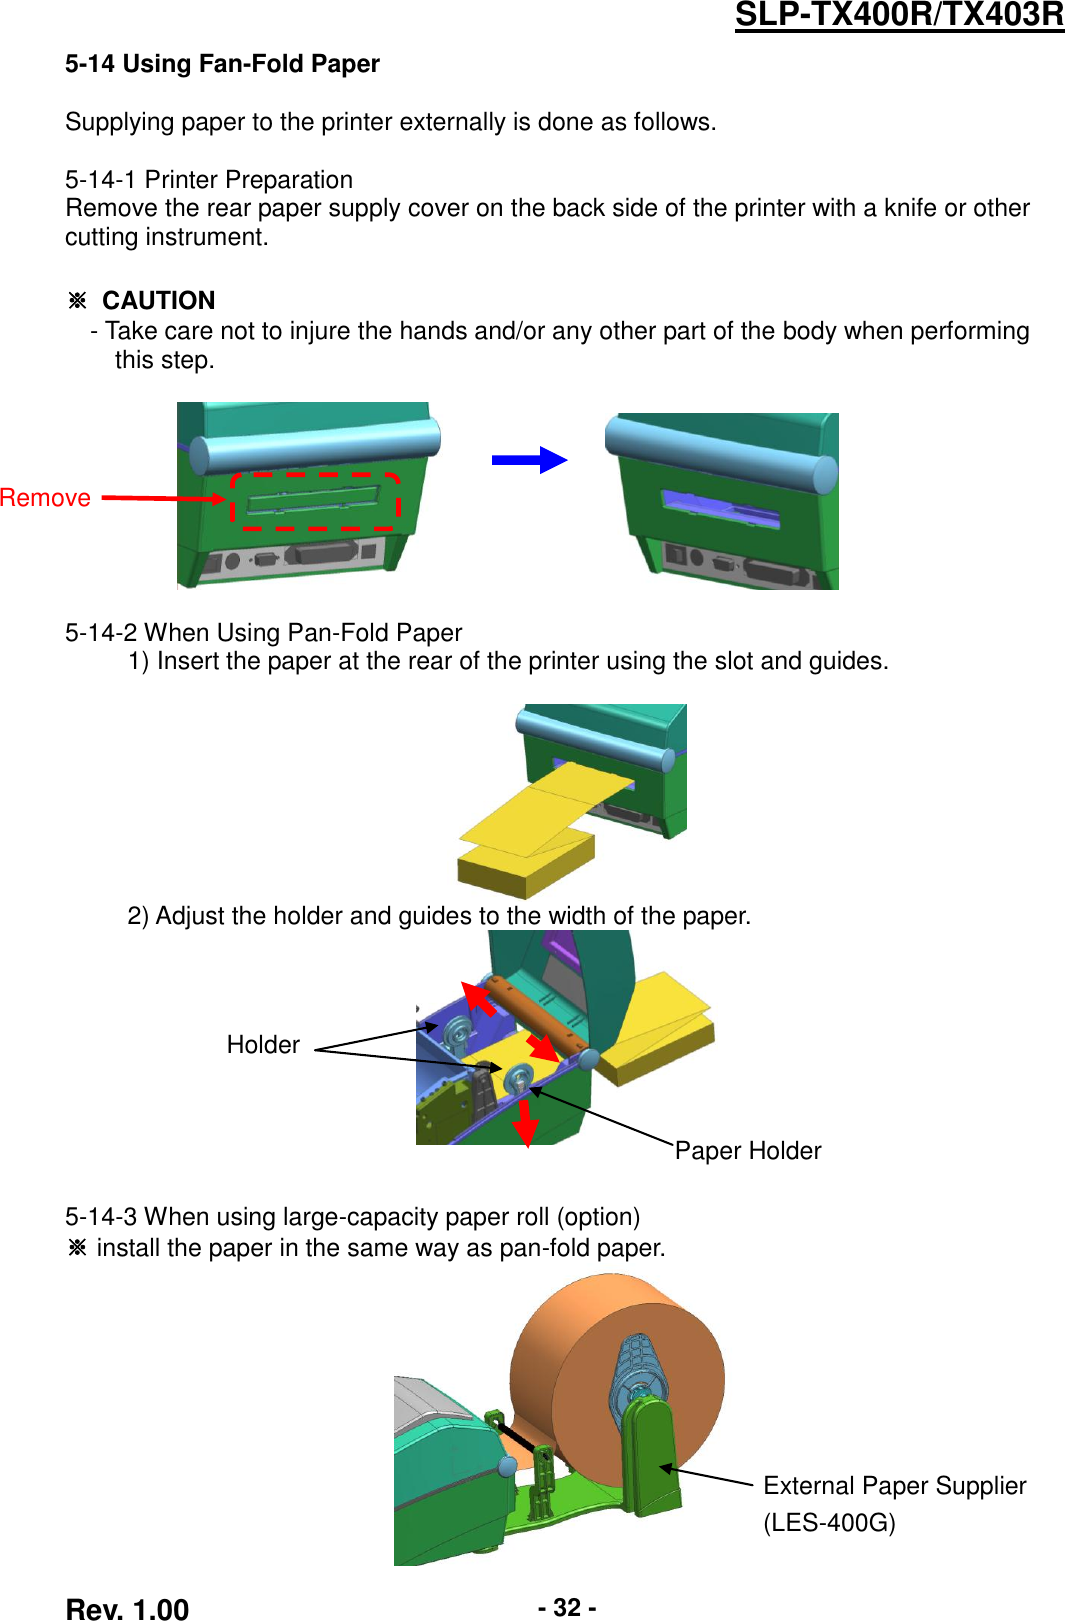  Rev. 1.00 - 32 - SLP-TX400R/TX403R 5-14 Using Fan-Fold Paper  Supplying paper to the printer externally is done as follows.  5-14-1 Printer Preparation Remove the rear paper supply cover on the back side of the printer with a knife or other cutting instrument.  ※  CAUTION - Take care not to injure the hands and/or any other part of the body when performing   this step.                                5-14-2 When Using Pan-Fold Paper      1) Insert the paper at the rear of the printer using the slot and guides.        2) Adjust the holder and guides to the width of the paper.    5-14-3 When using large-capacity paper roll (option) ※ install the paper in the same way as pan-fold paper.  Remove Paper Holder  Holder  External Paper Supplier (LES-400G) 